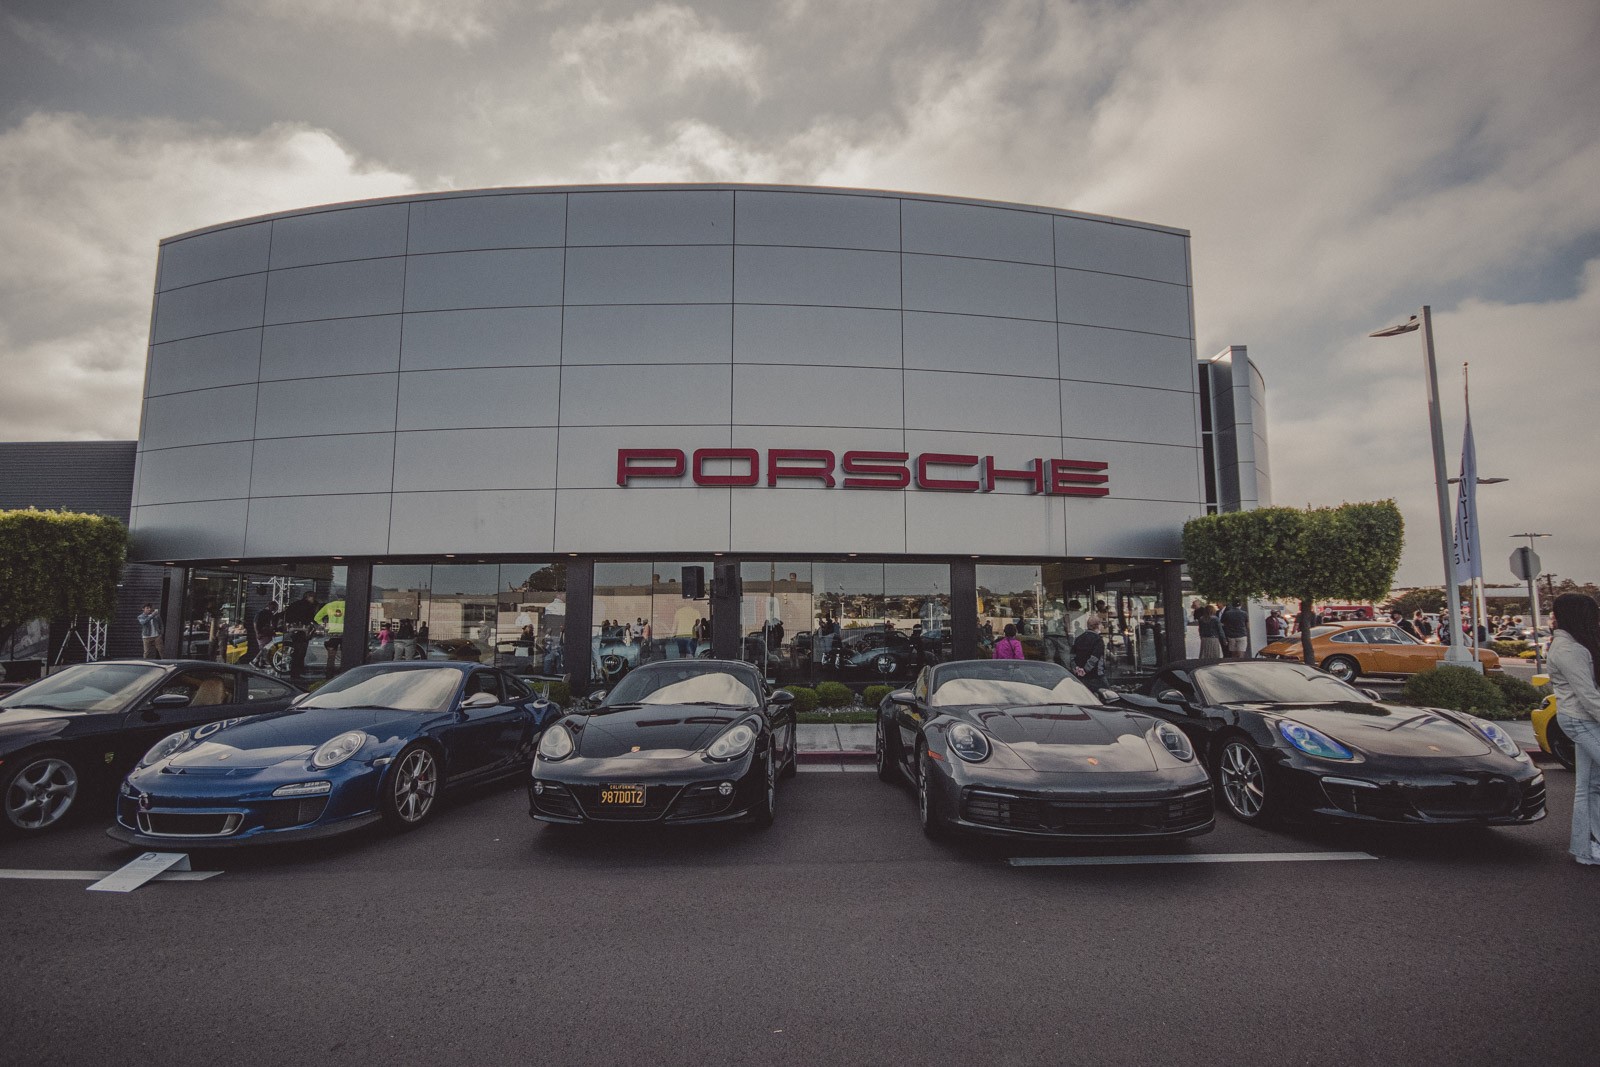 A variety of new Porsches lined up on Del Monte Blvd. in front of the Porsche dealership showroom